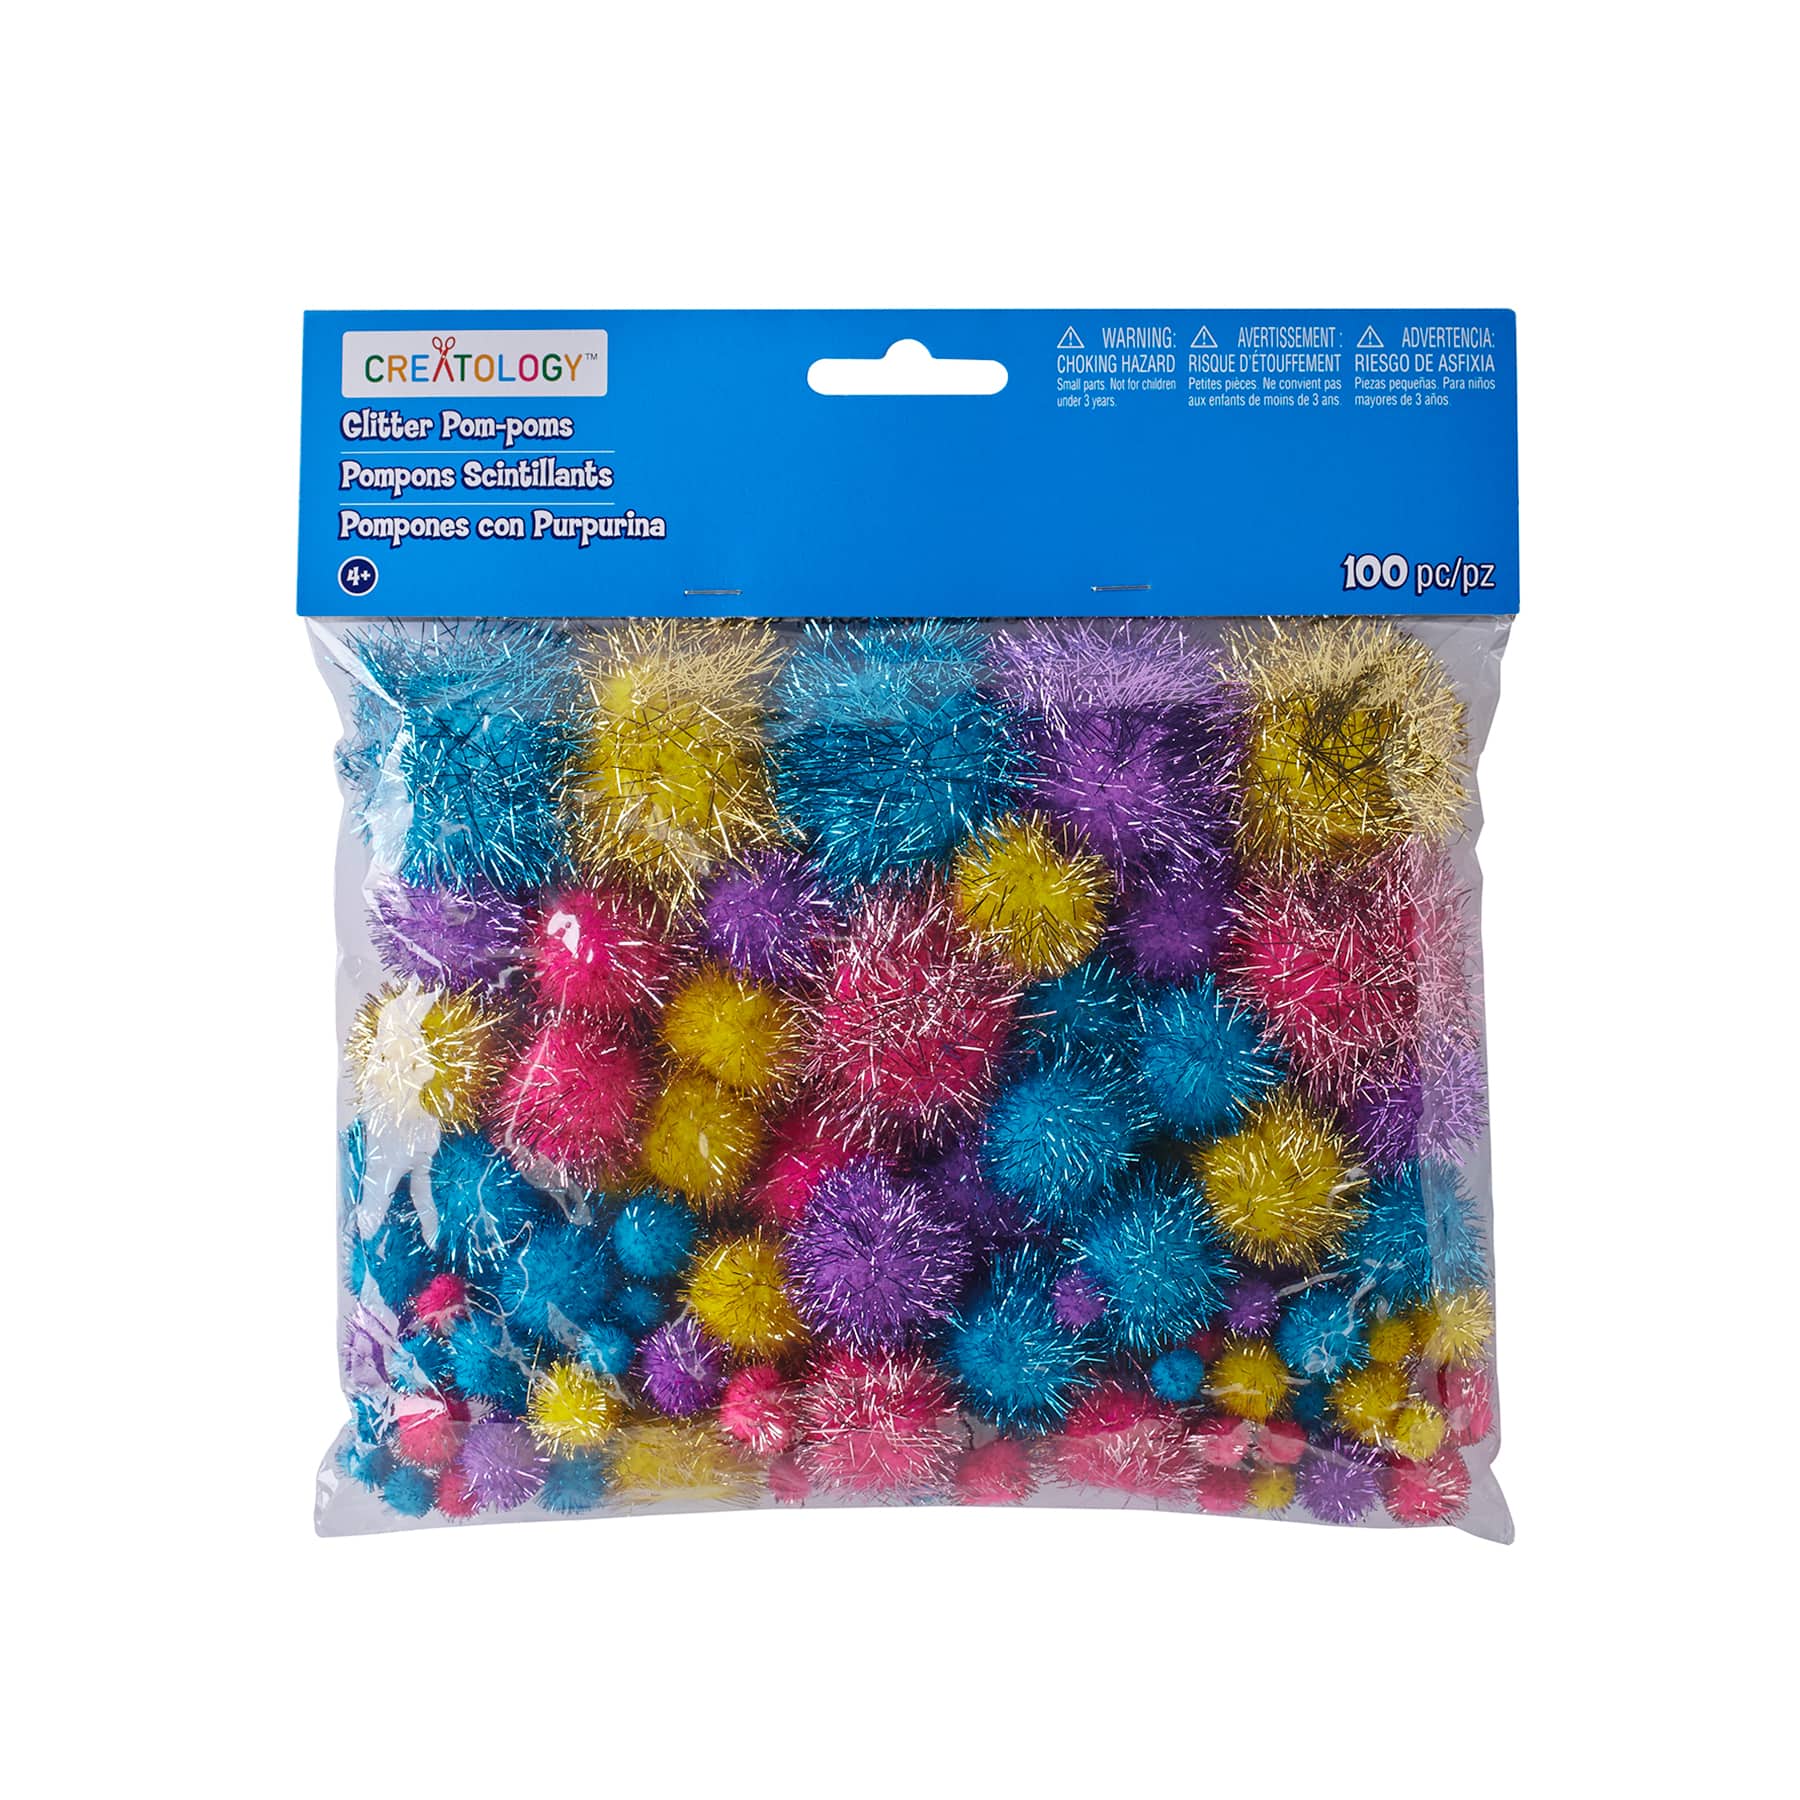 Shop for Glitter Mix Pom Poms By Creatology™ at Michaels